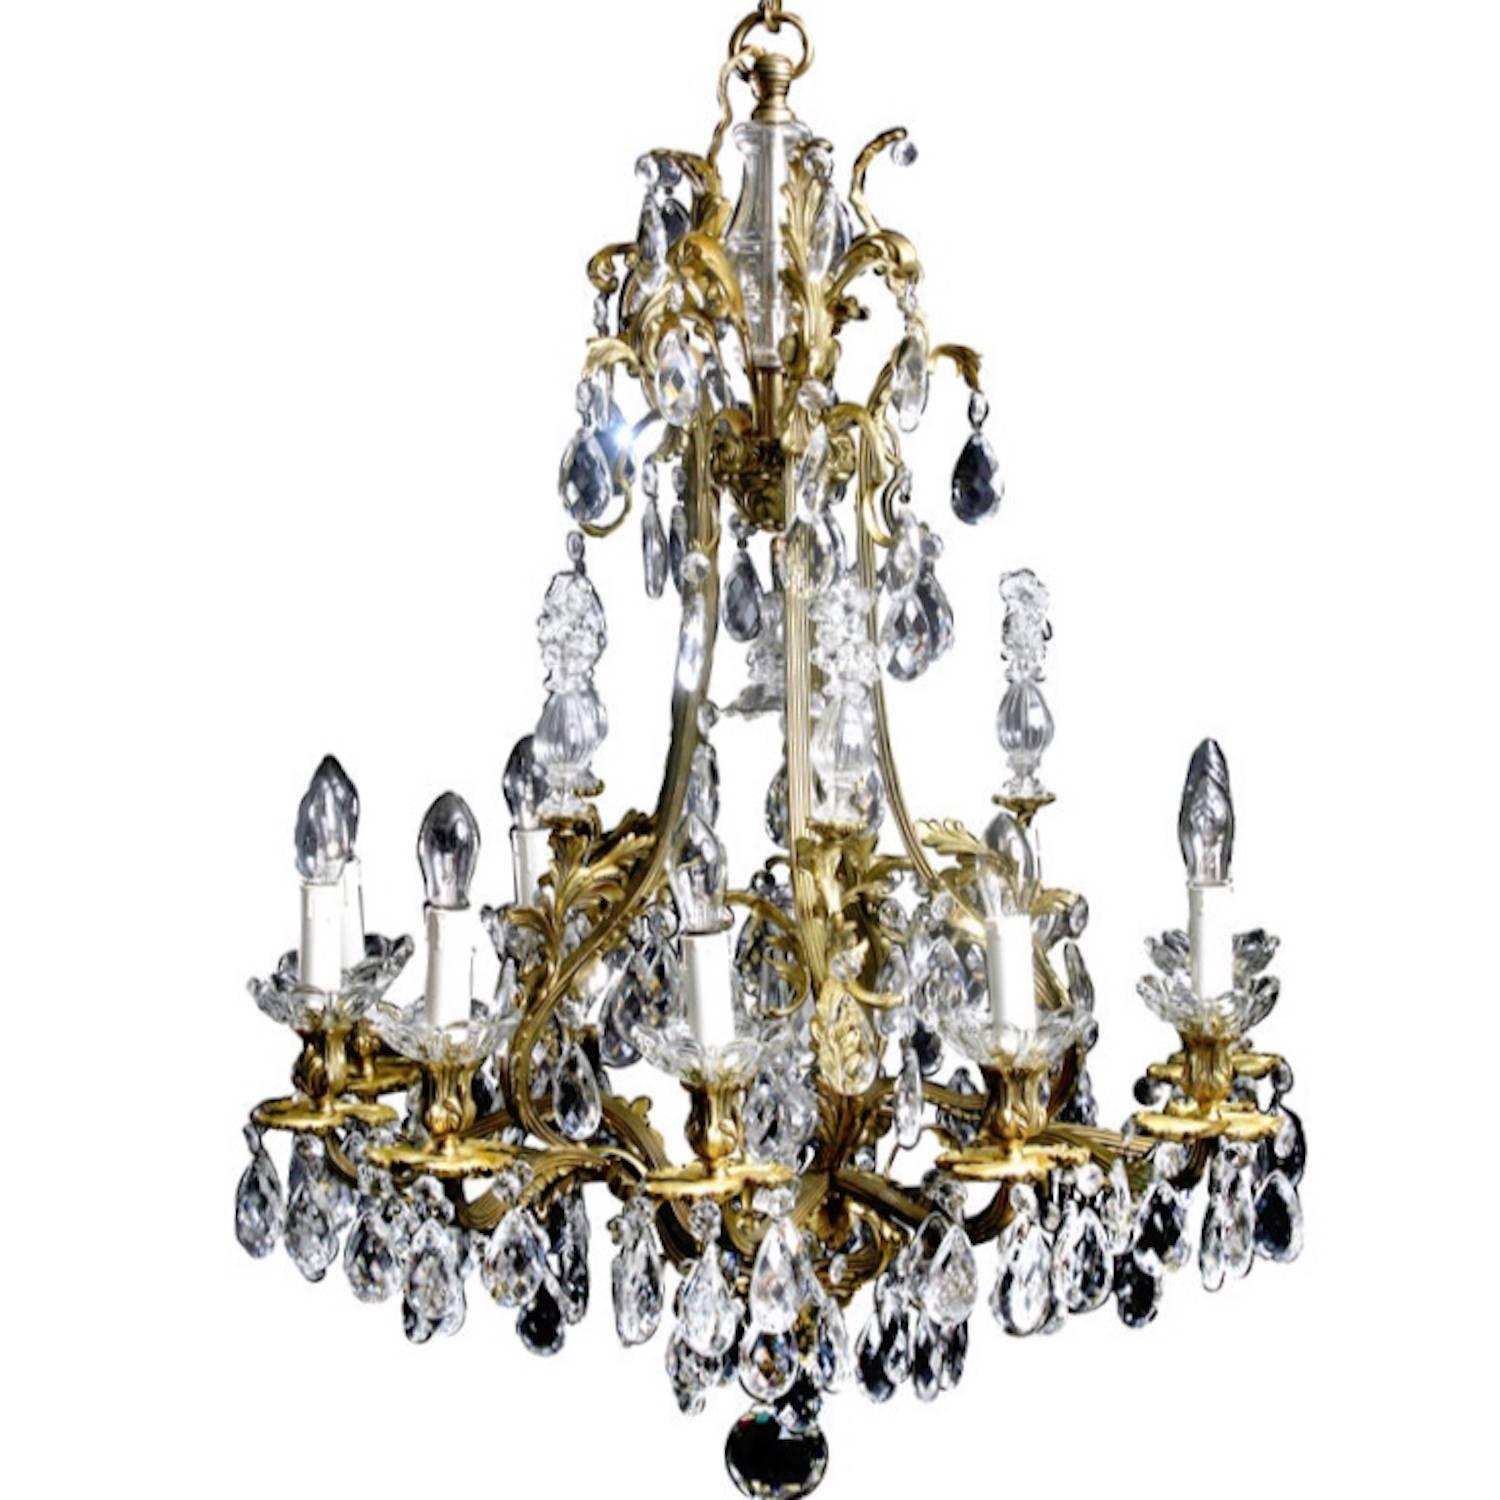 Chandelier Large Swedish Rococo Style 19th Century Sweden